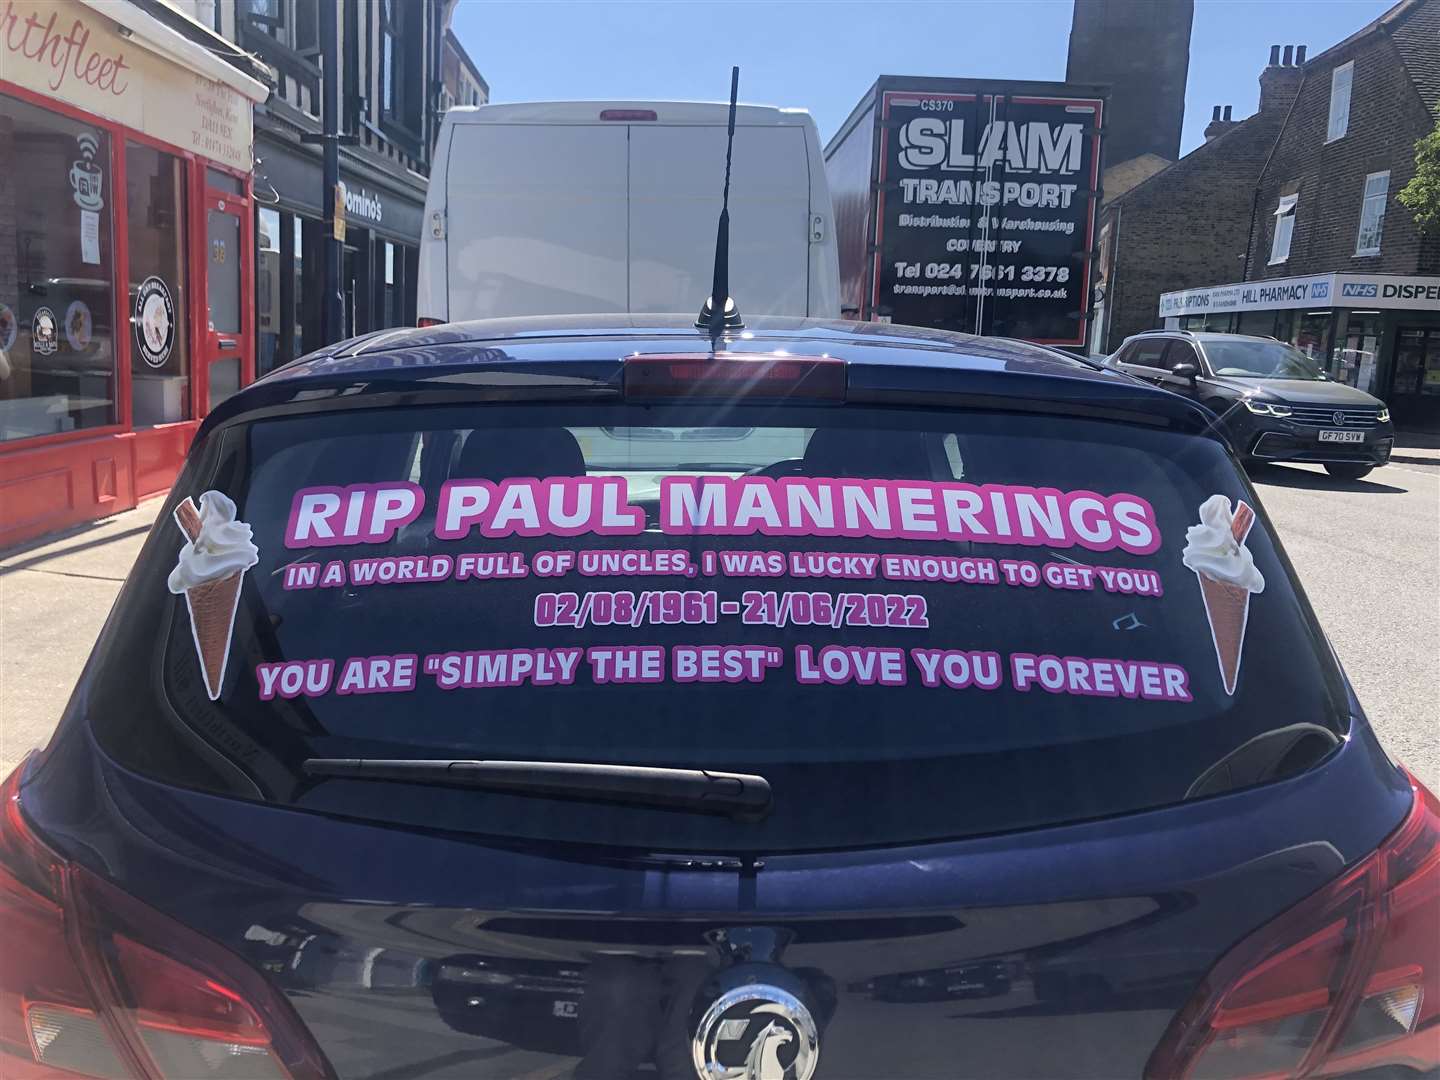 A tribute written on the back of a car